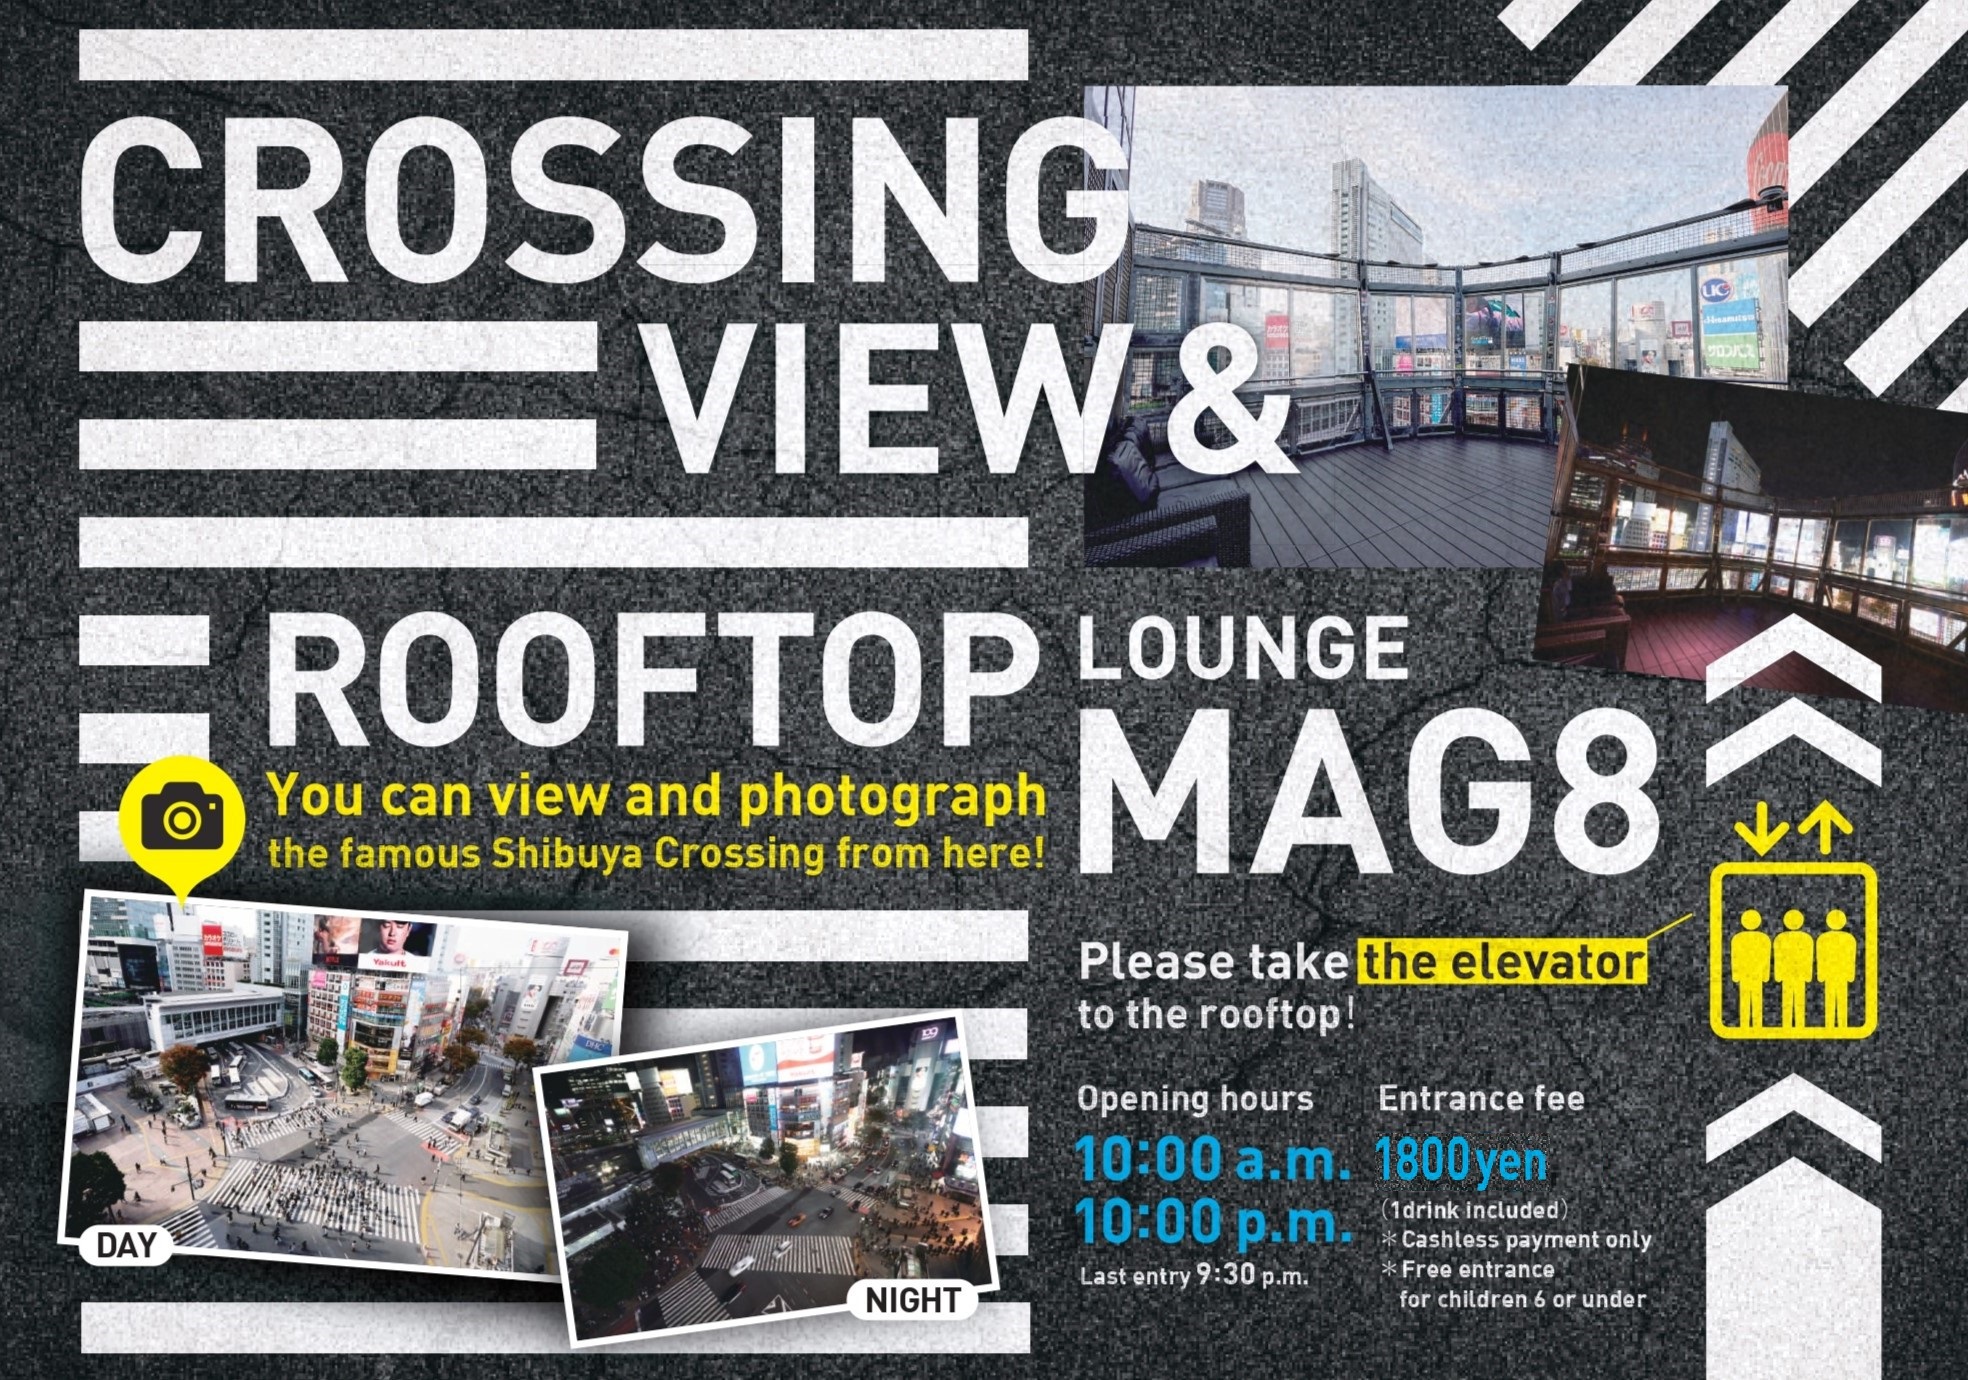 CROSSING VIEW & ROOFTOP LOUNGE MAG8